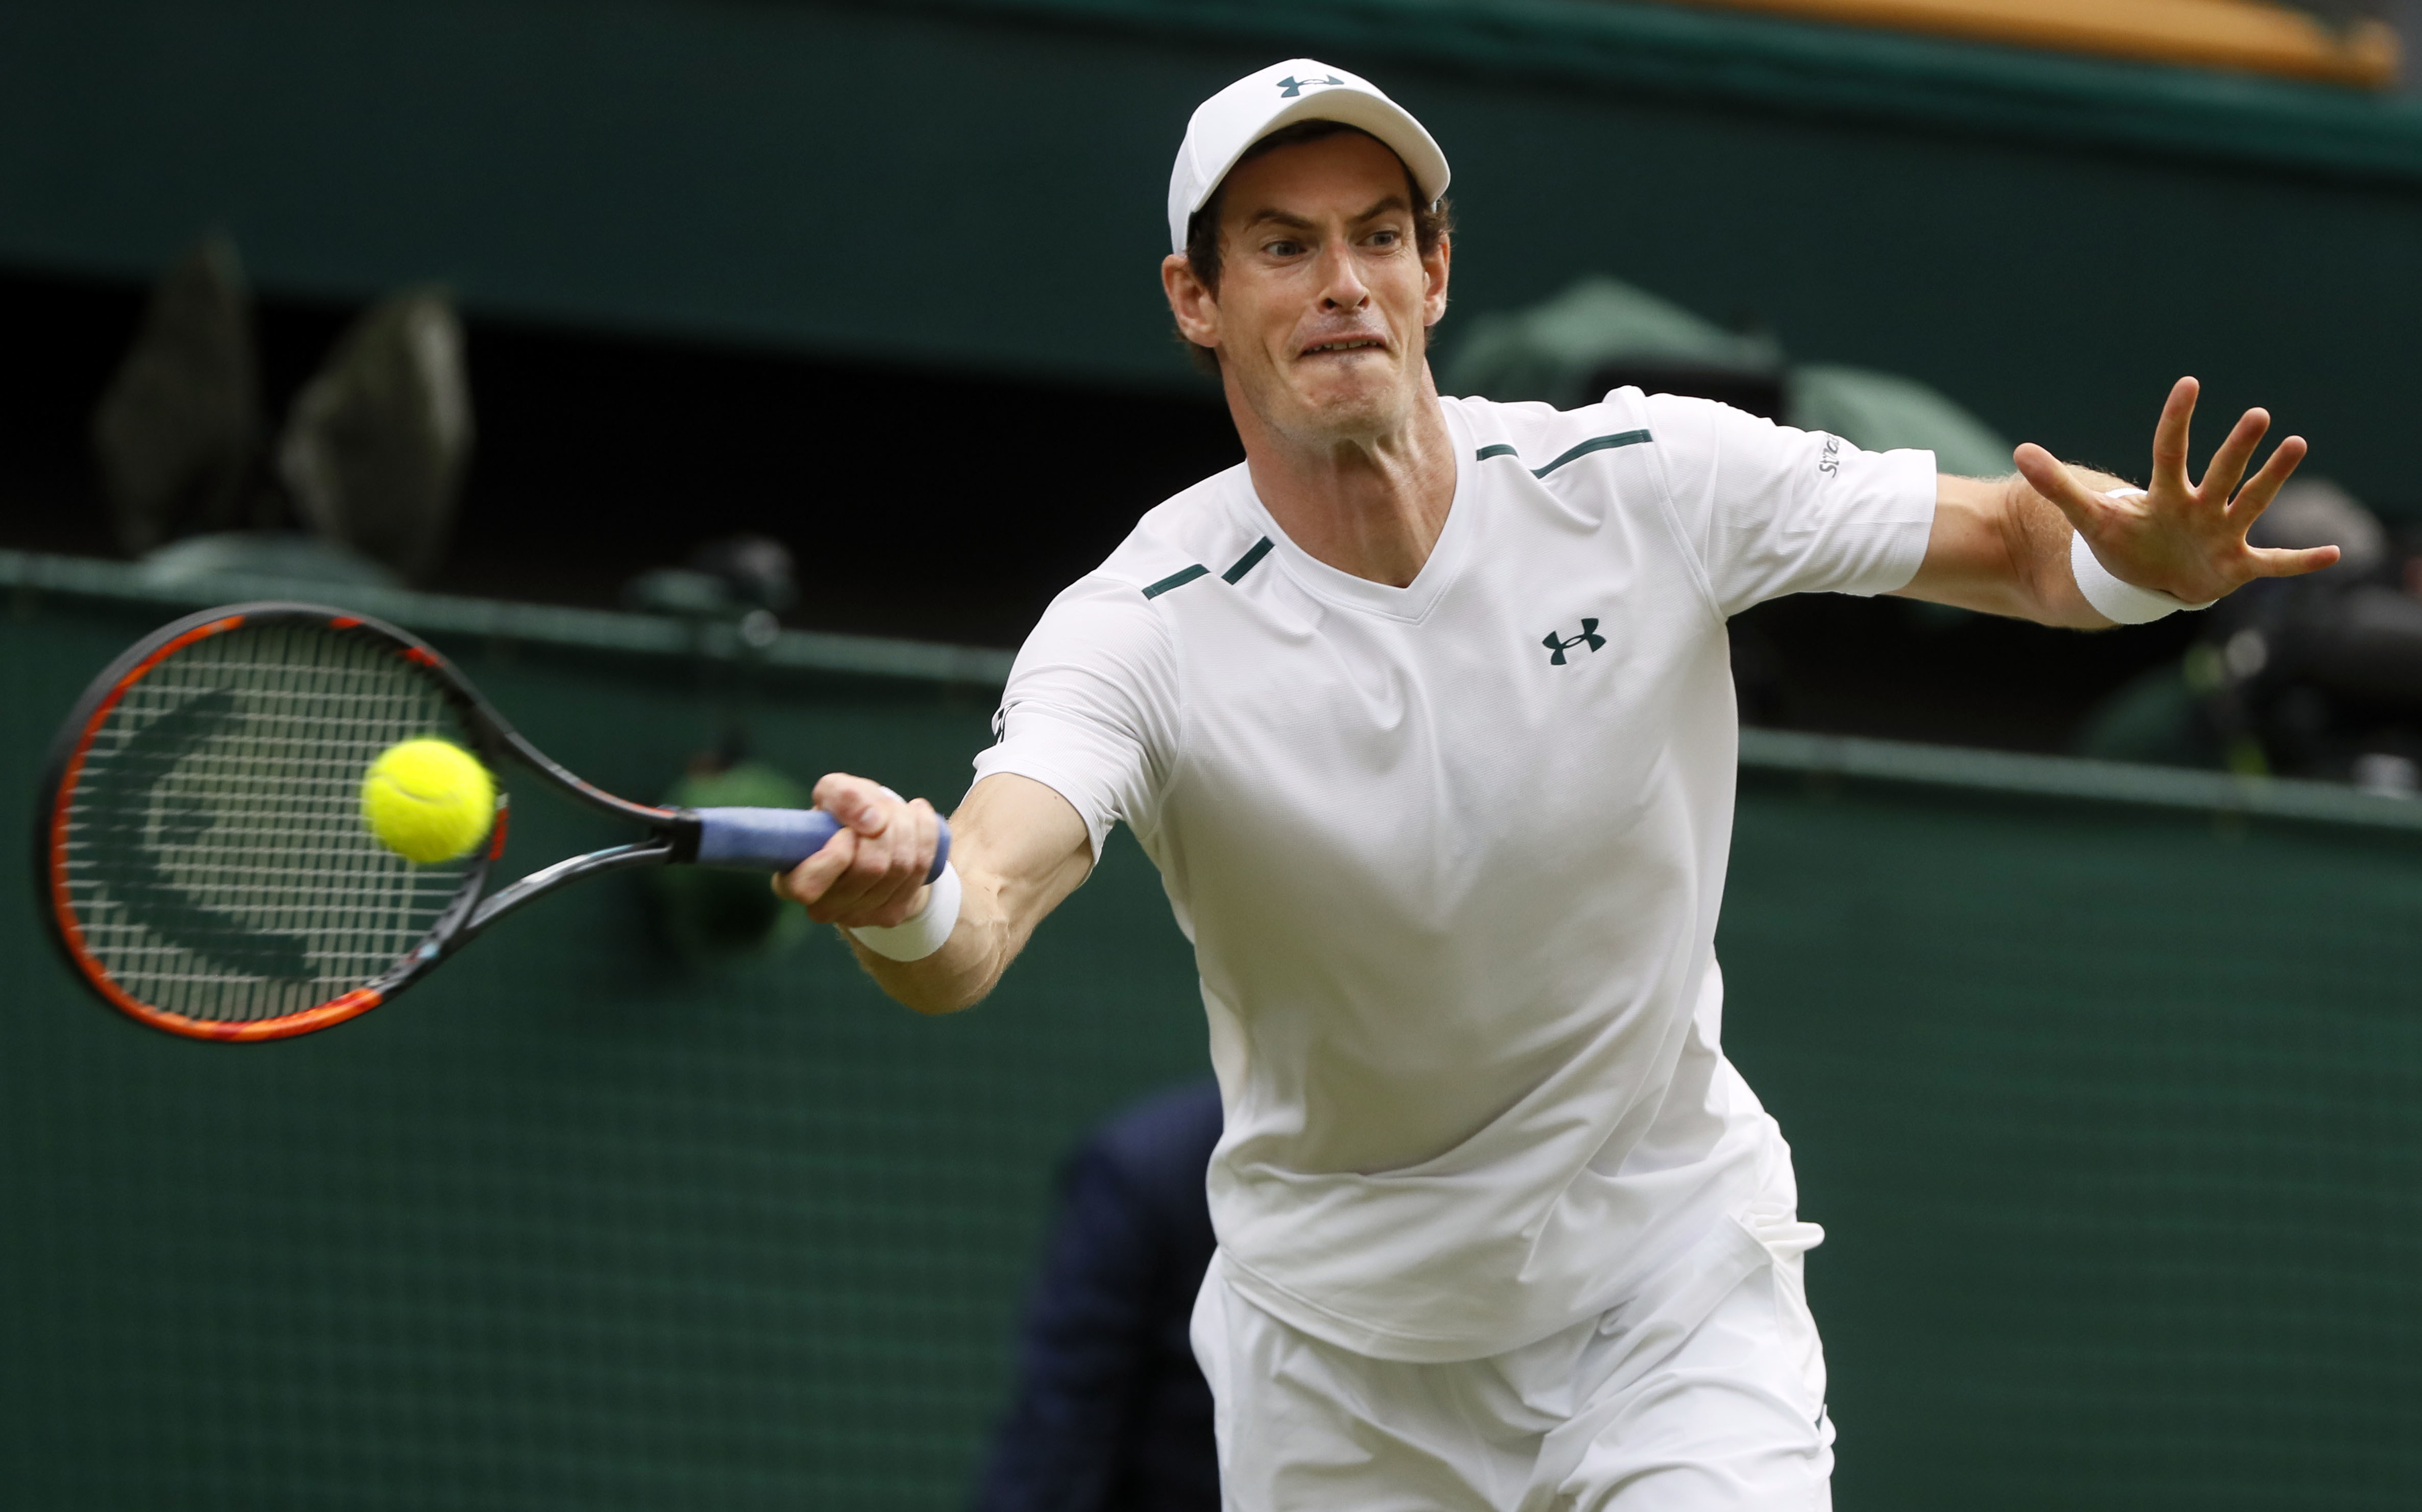 Britain's Andy Murray returns to Kazakhstan's Alexander Bublik during their Men's Singles Match on the opening day at the Wimbledon Tennis Championships in London Monday, July 3, 2017. (AP Photo/Kirsty Wigglesworth)